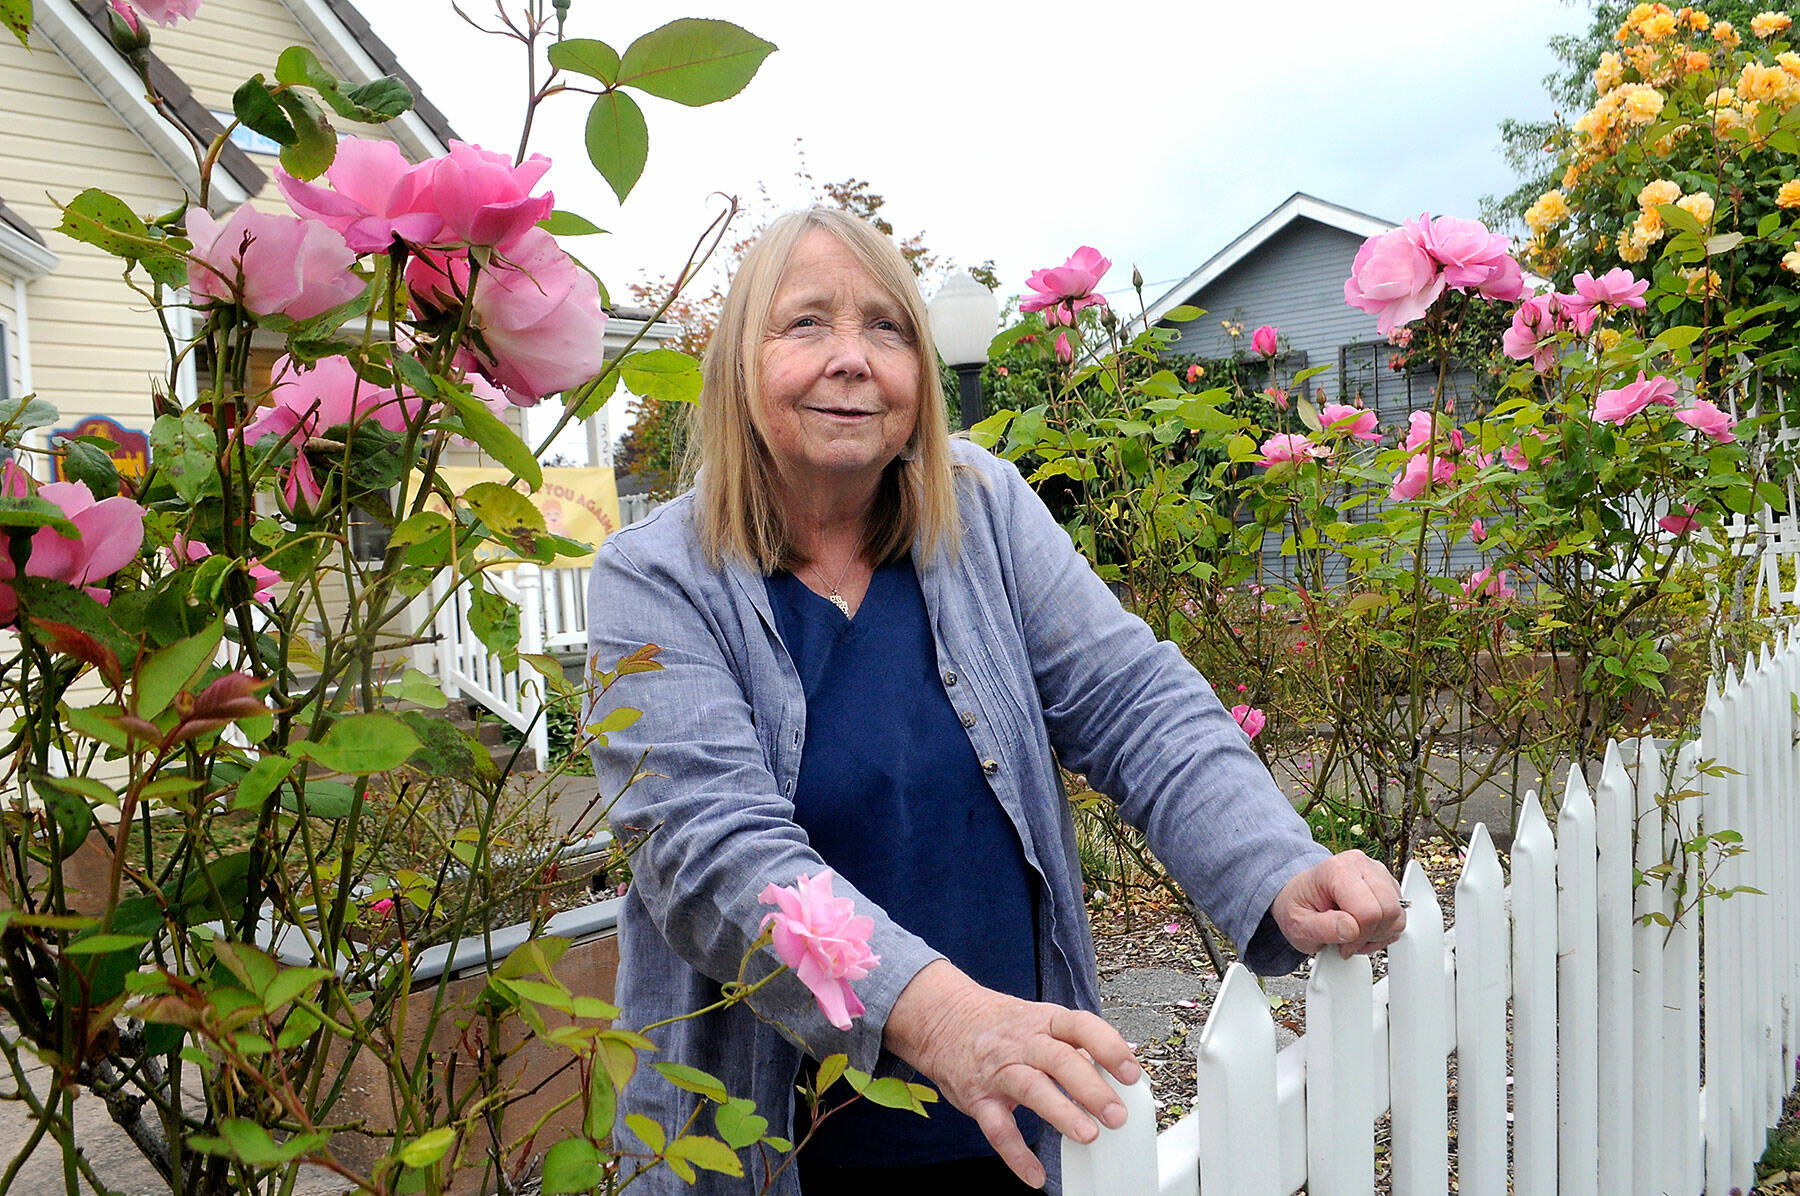 Venita “Nita” Lynn, executive director of First Step Family Support Center in Port Angeles, is retiring after nearly 40 years of service in Clallam County. (Keith Thorpe/Peninsula Daily News)